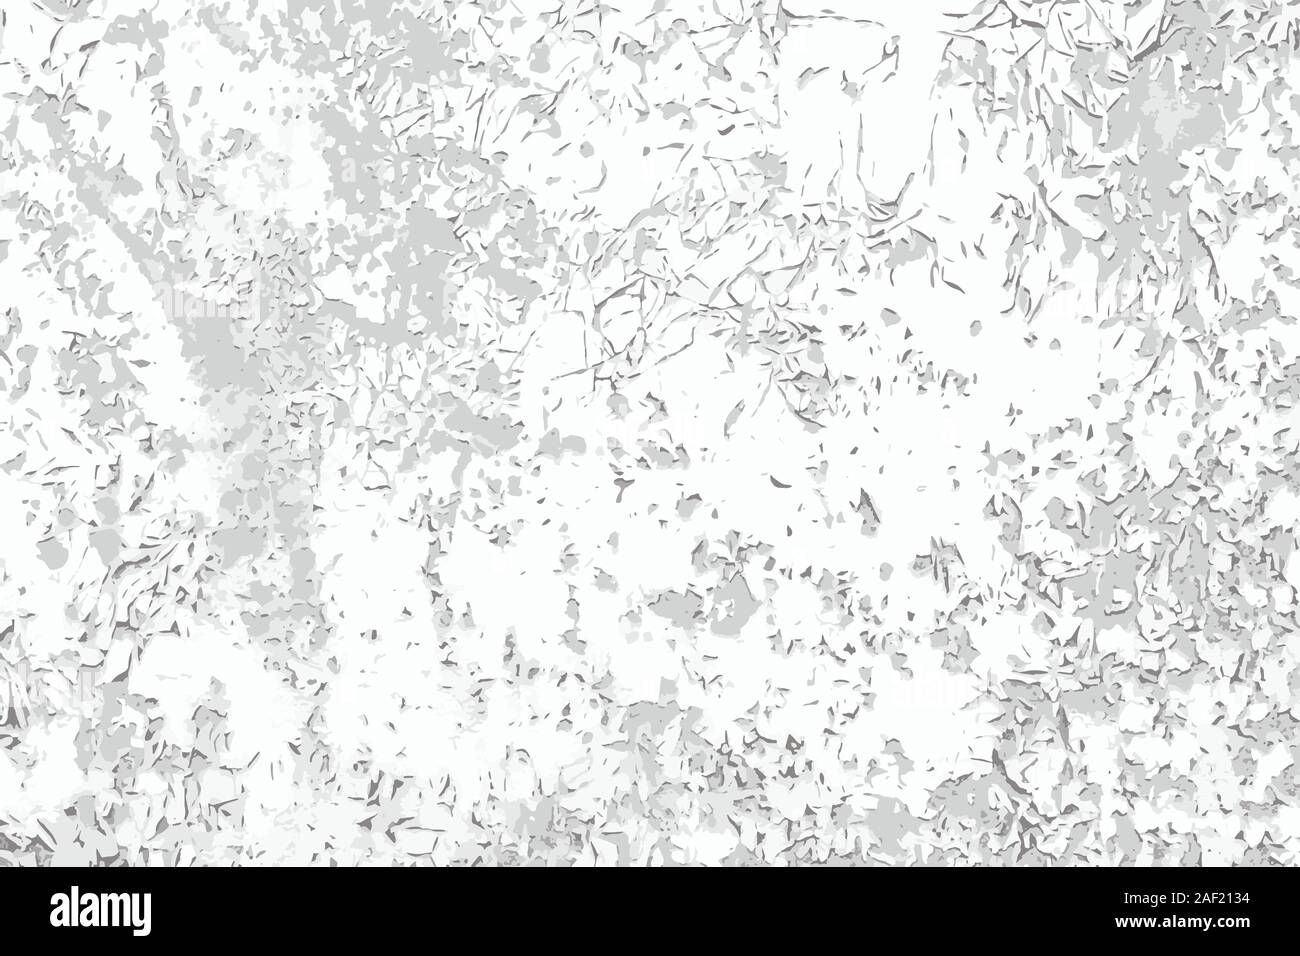 Scratch cracked paint vector black and white background. Grunge texture  template for overlay artwork. Stock Vector